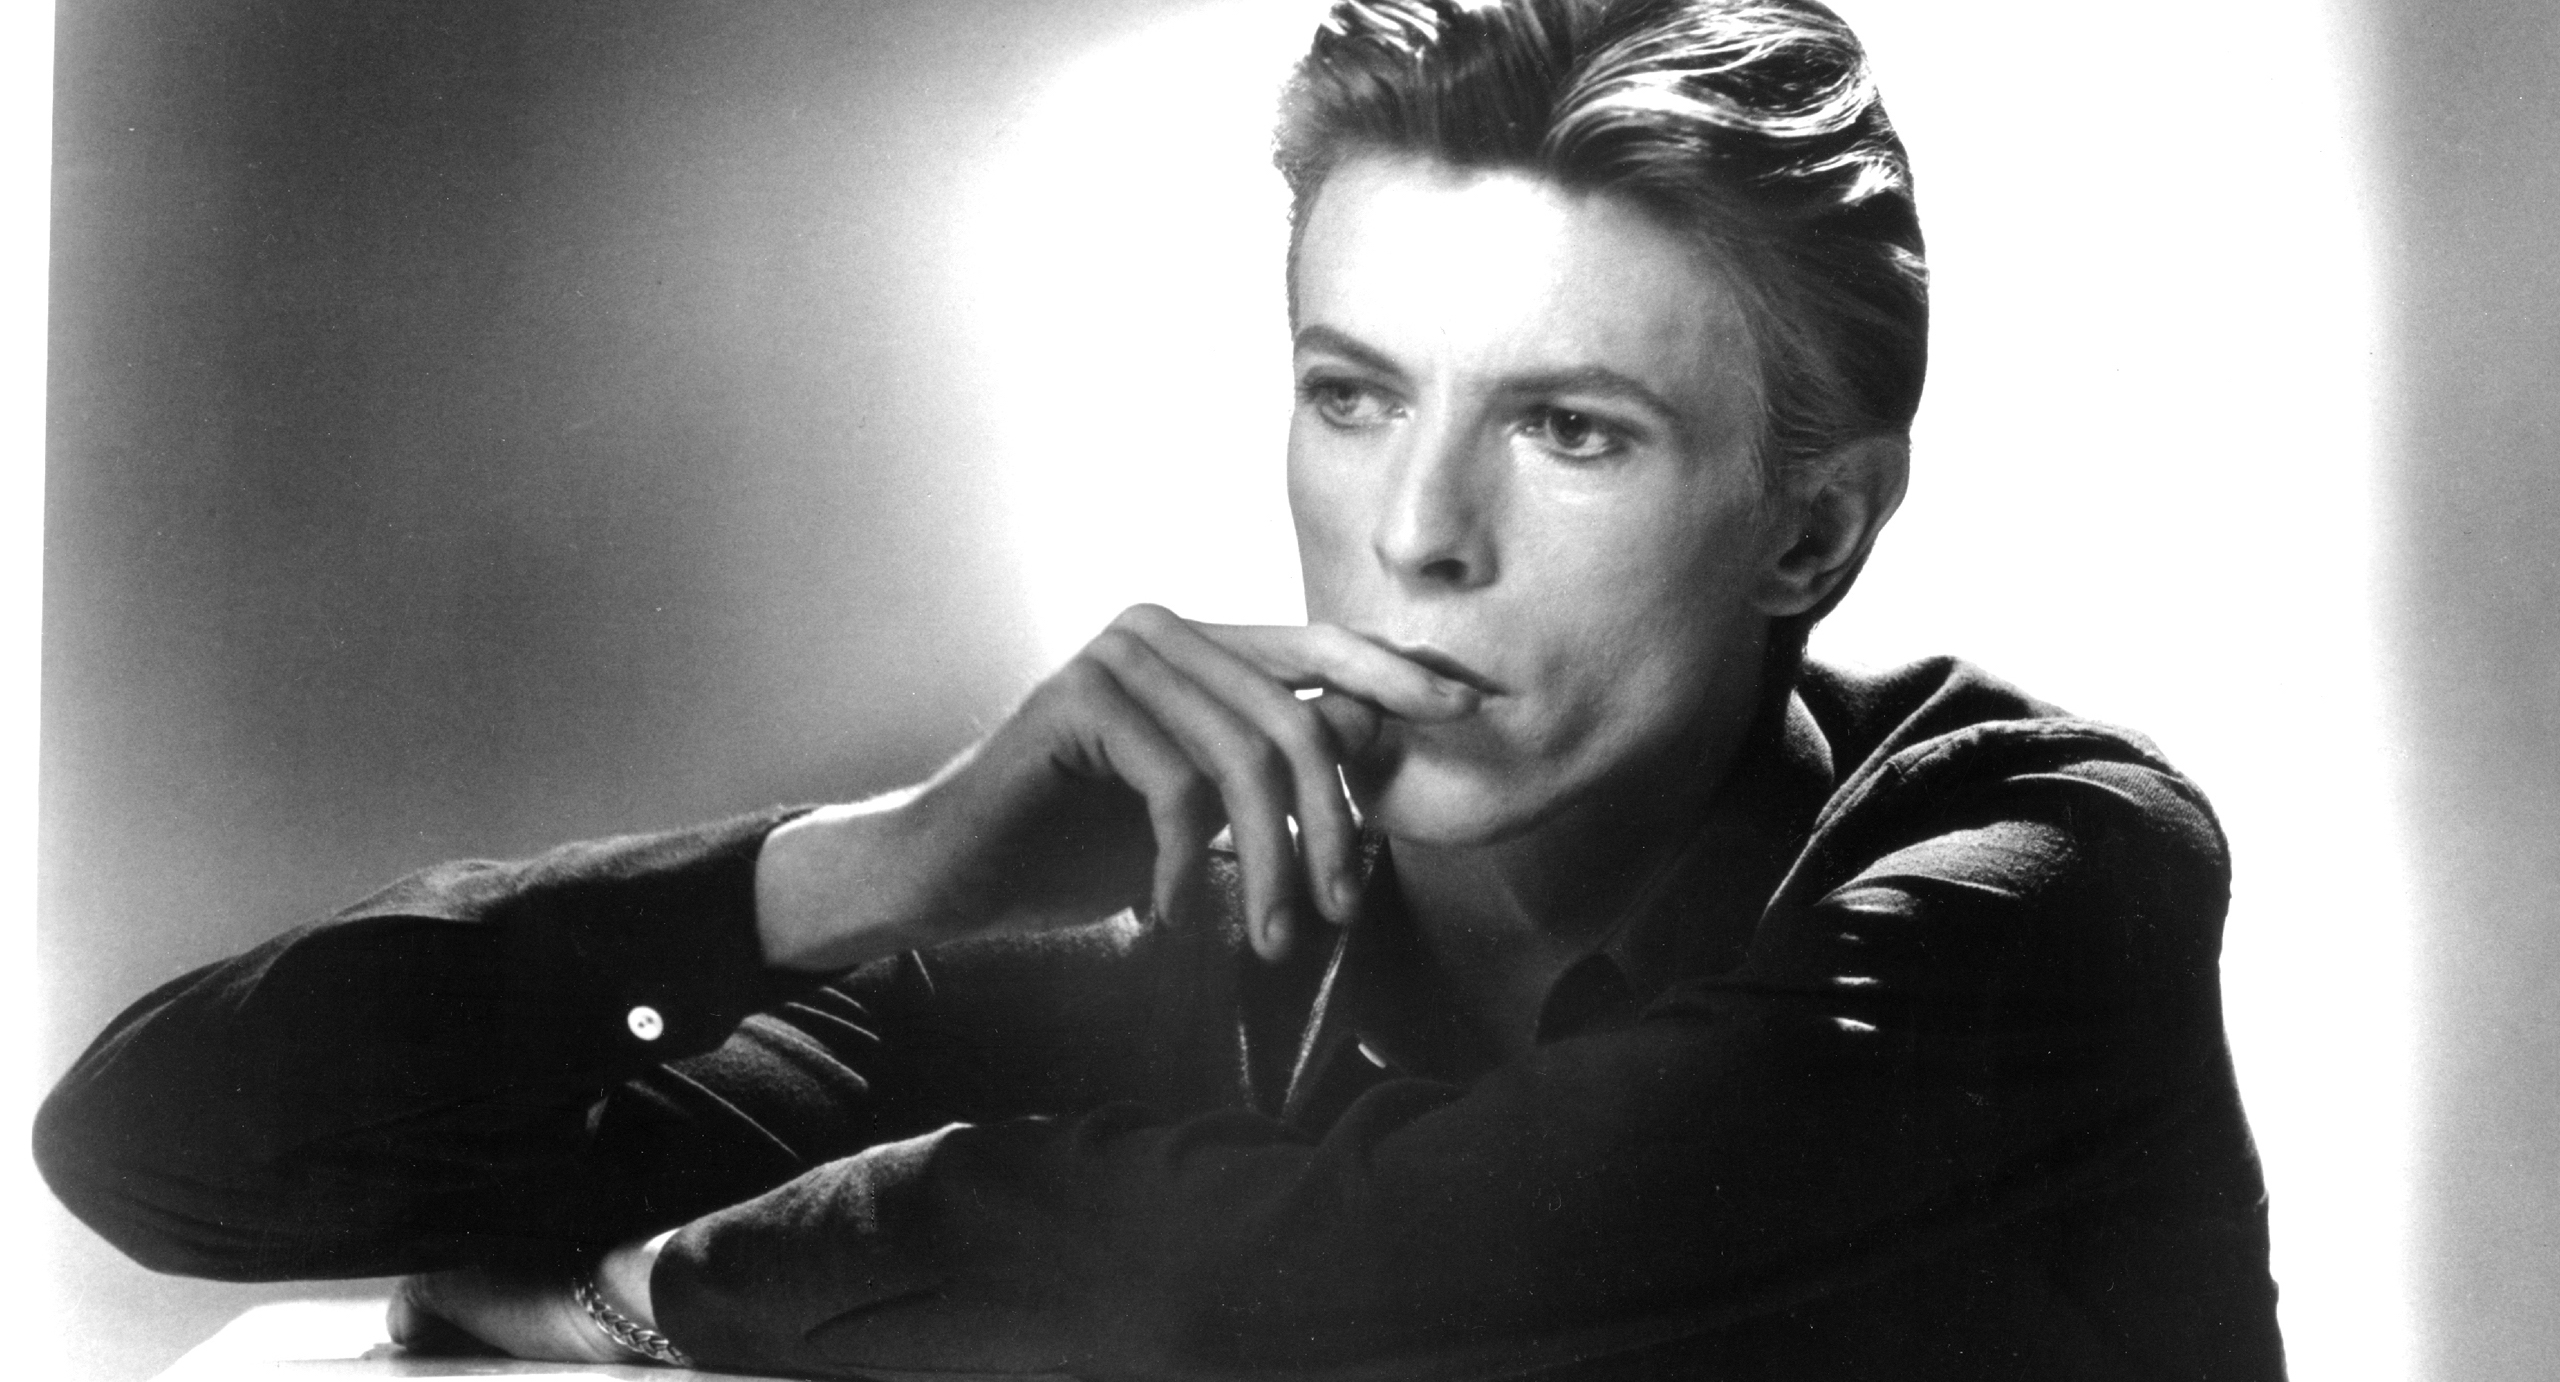 David Bowie Photo by Michael Ochs Archives/Getty Images